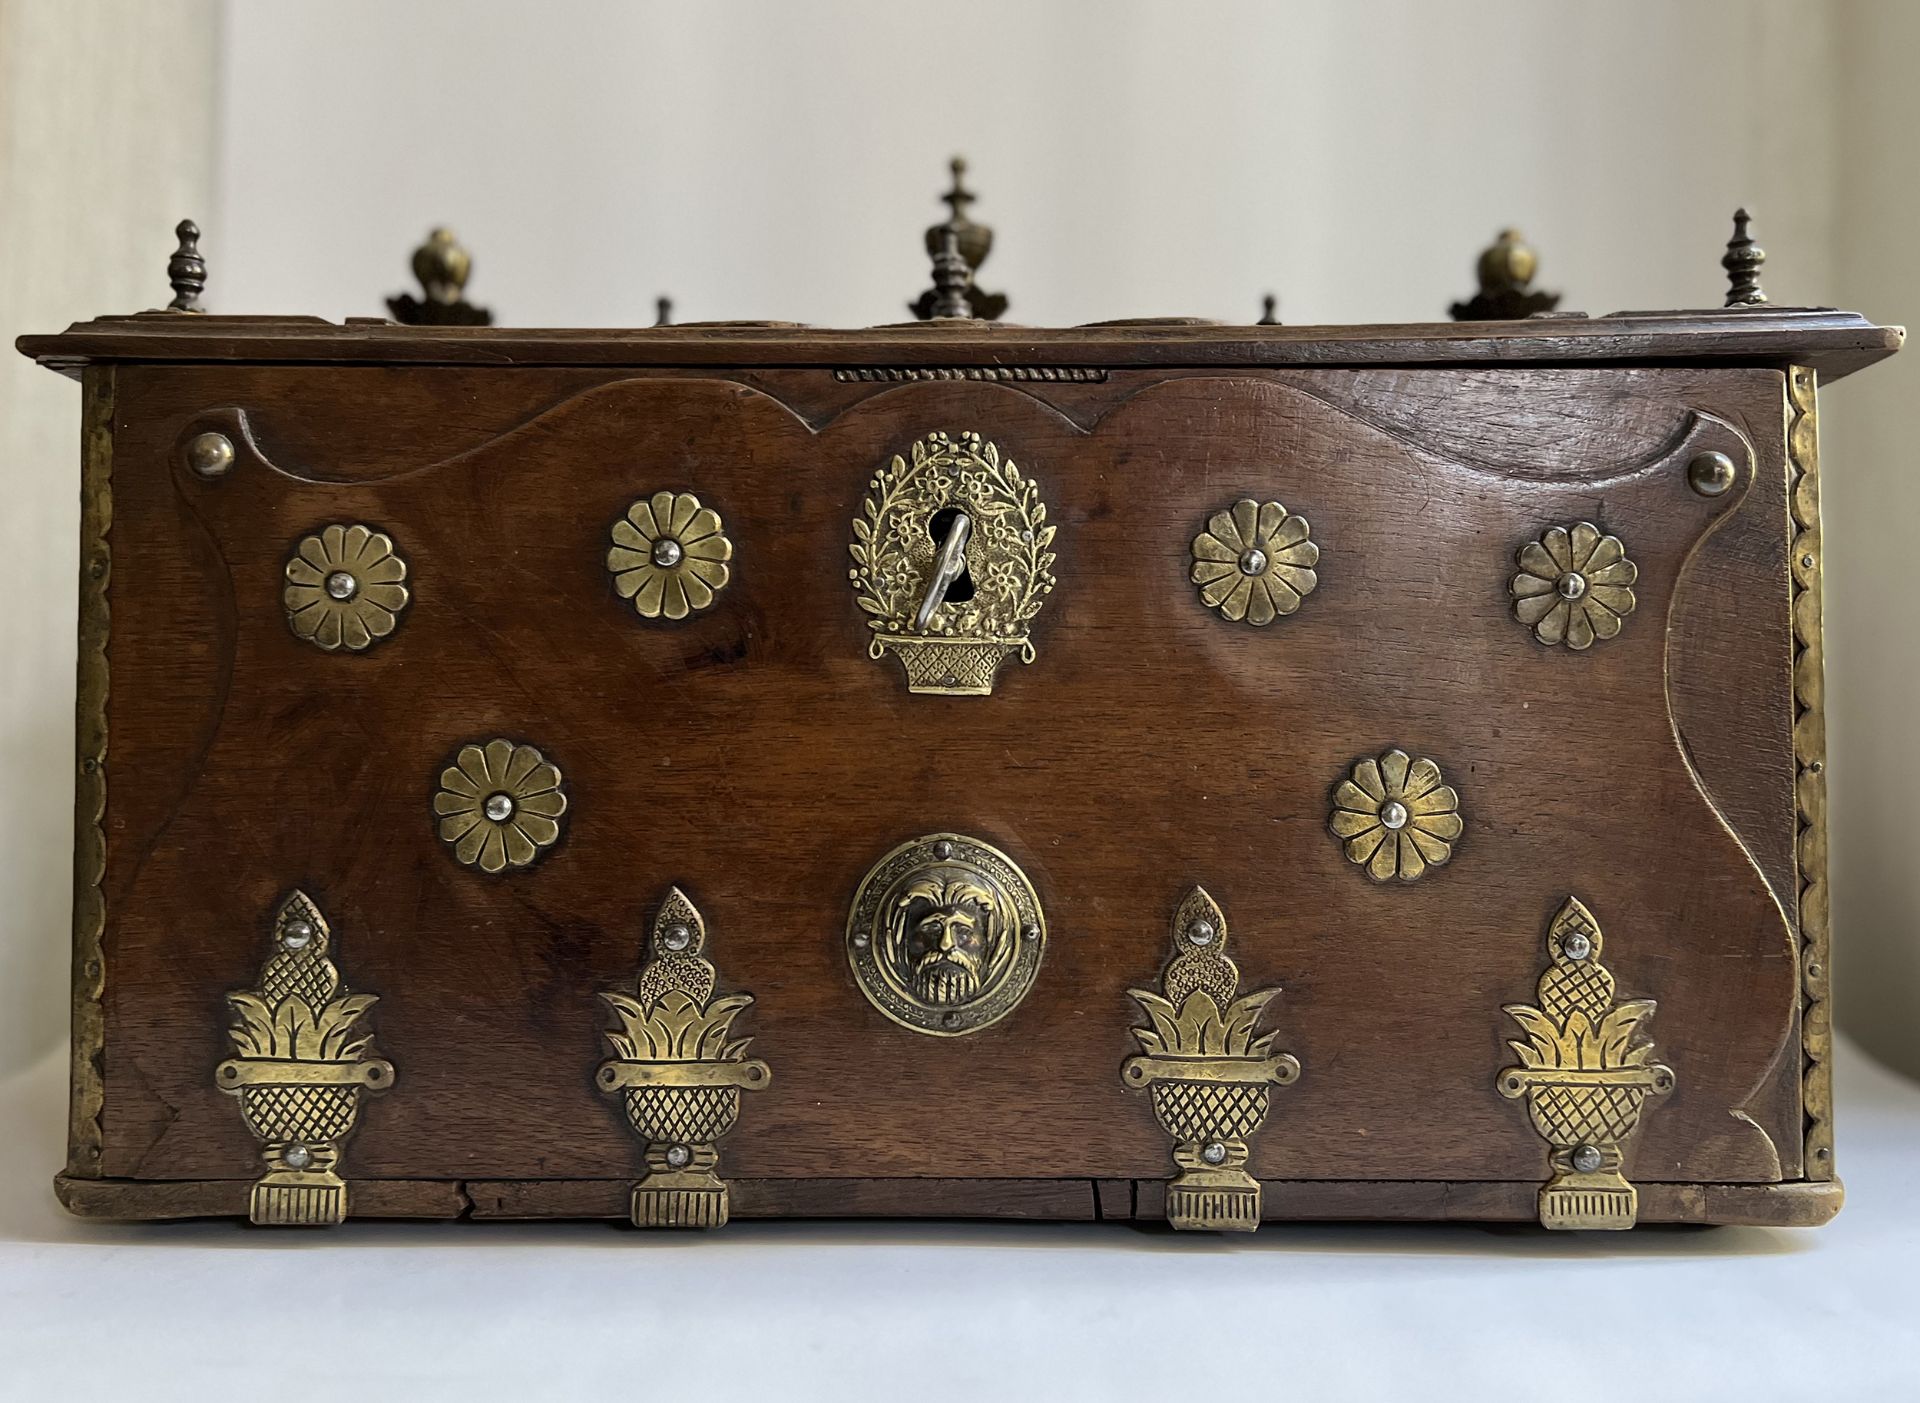 Rare Indian Colonial chest in teak and Bronze Pavilion appliqués, Gujarat, 18th century - Image 7 of 8